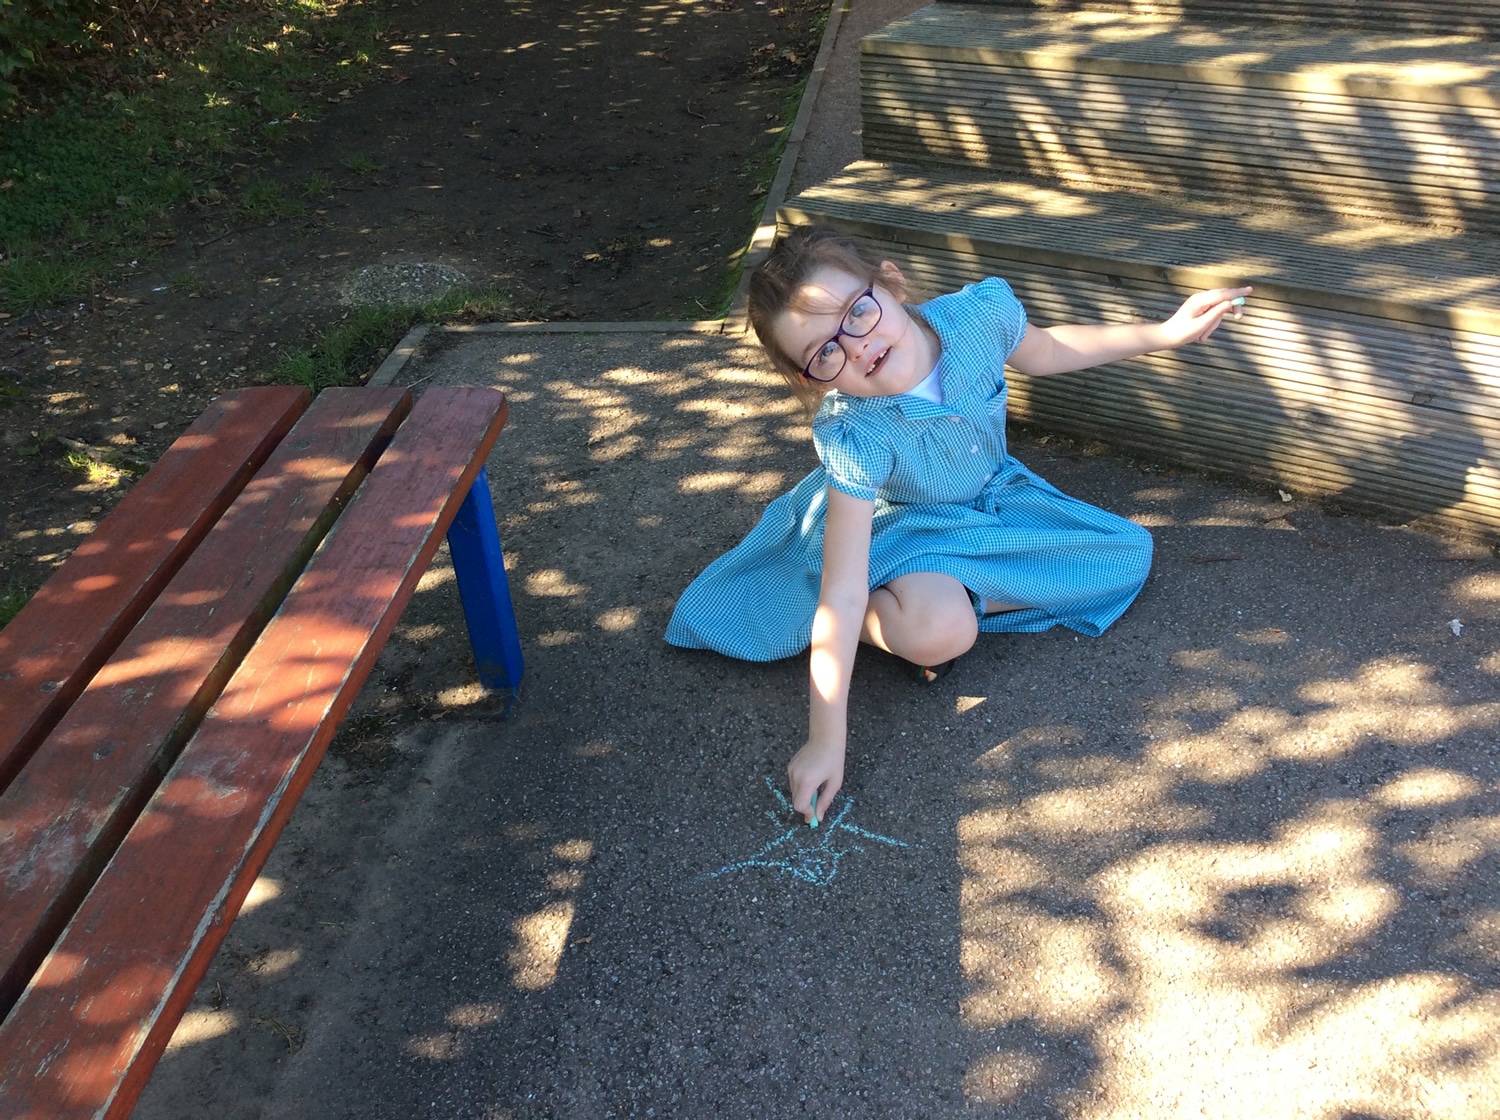 Chalk drawings on the playground